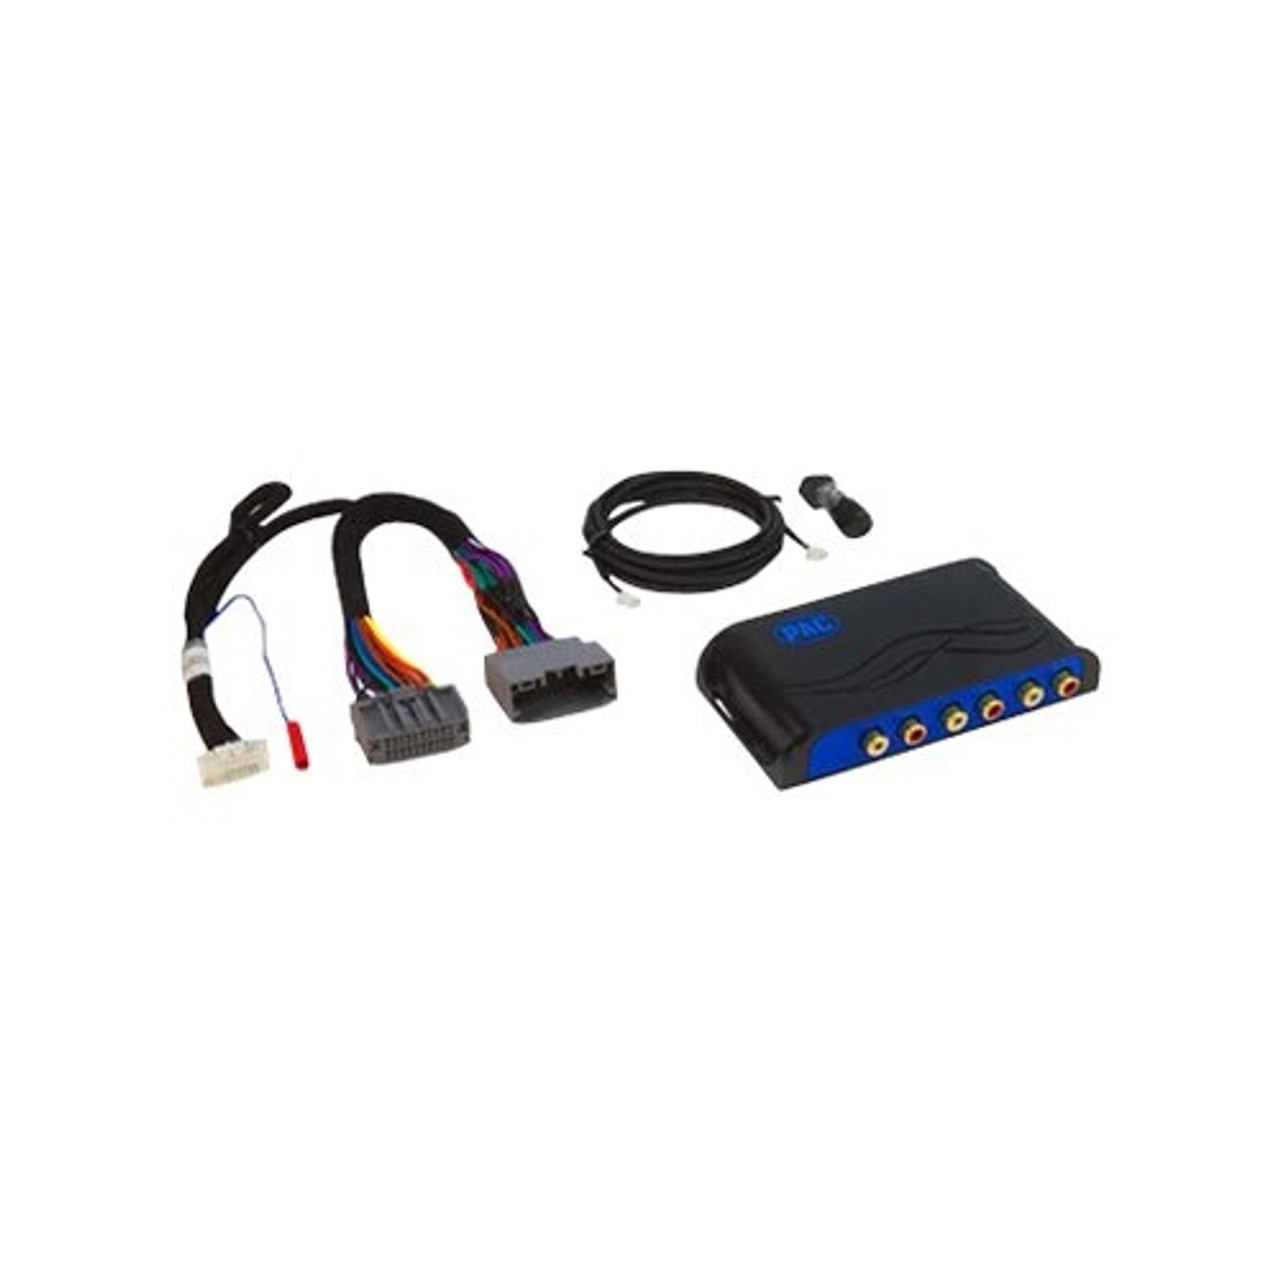 PAC - Car Audio Replacement Interface for Select Chrysler, Dodge and Jeep Vehicles - Blue/black